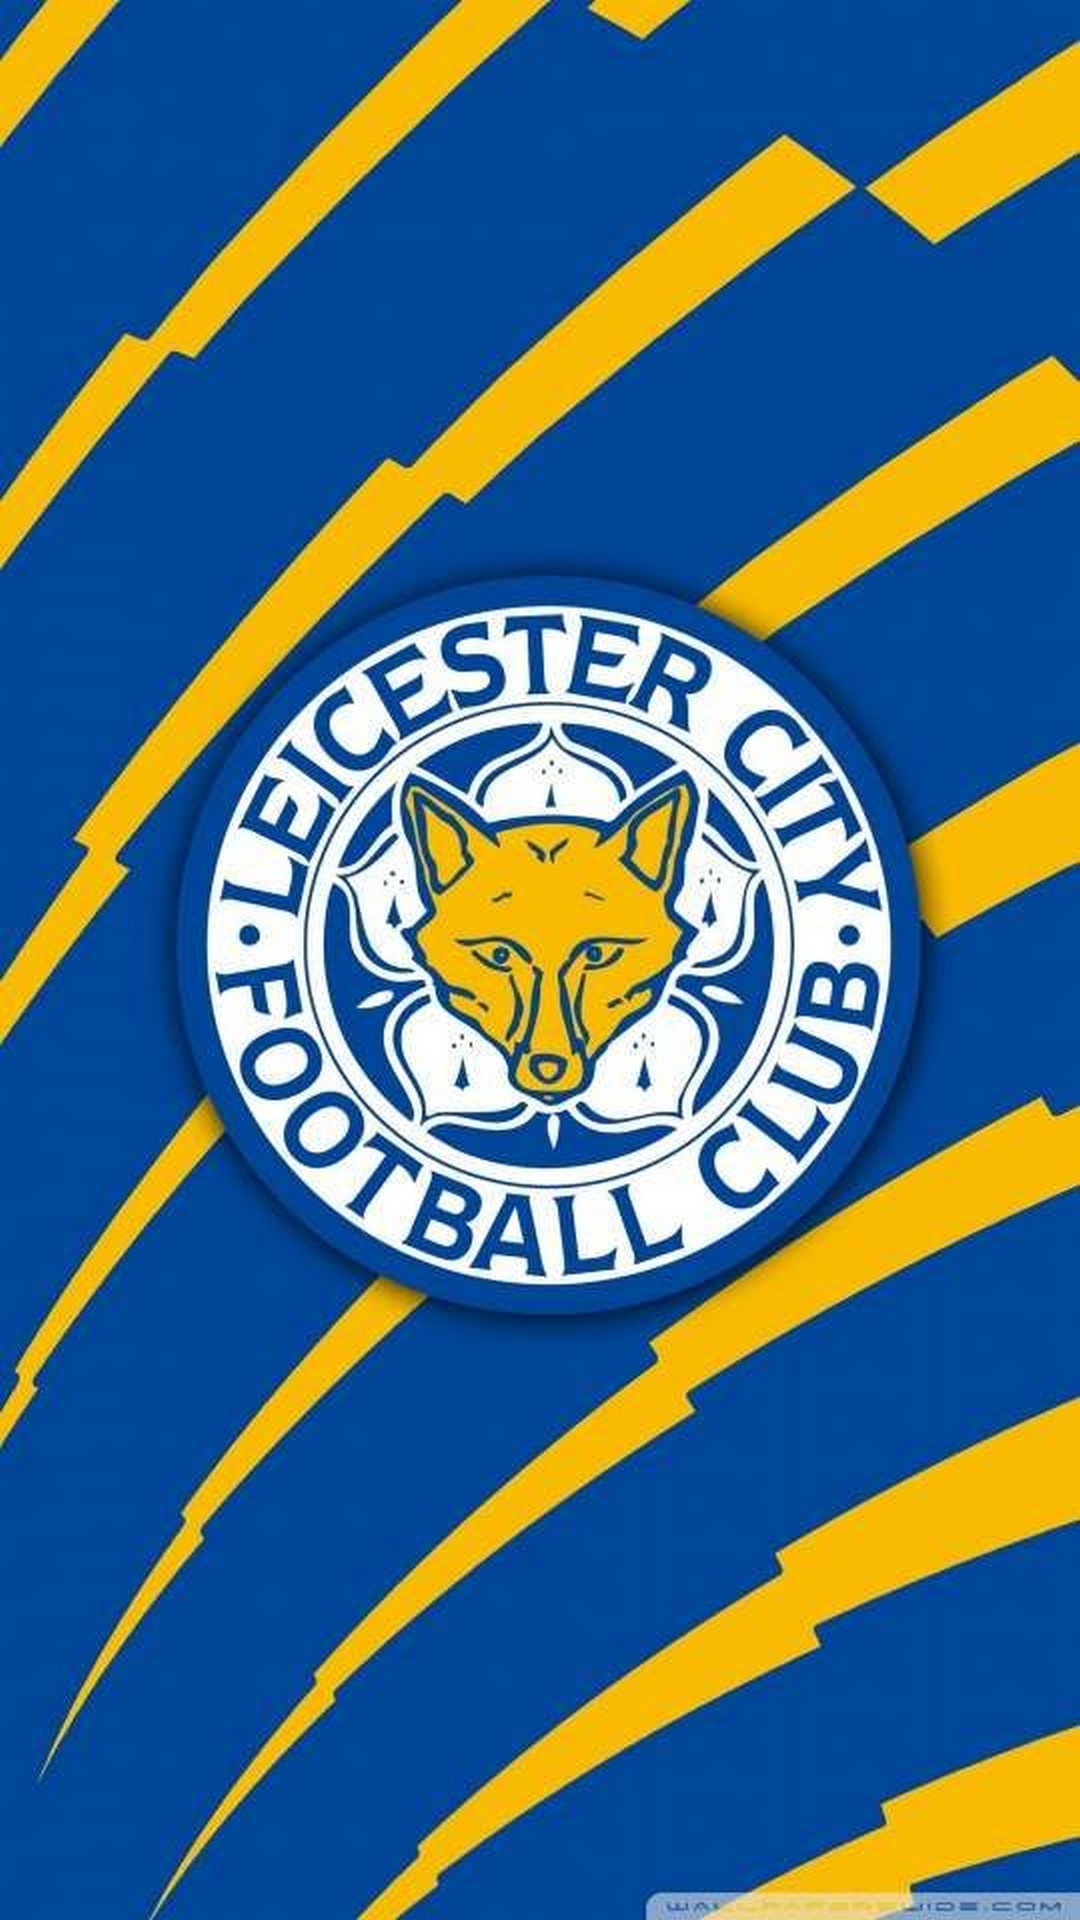 Leicester City Logo HD Wallpaper For iPhone With high-resolution 1080X1920 pixel. You can use this wallpaper for your Desktop Computers, Mac Screensavers, Windows Backgrounds, iPhone Wallpapers, Tablet or Android Lock screen and another Mobile device